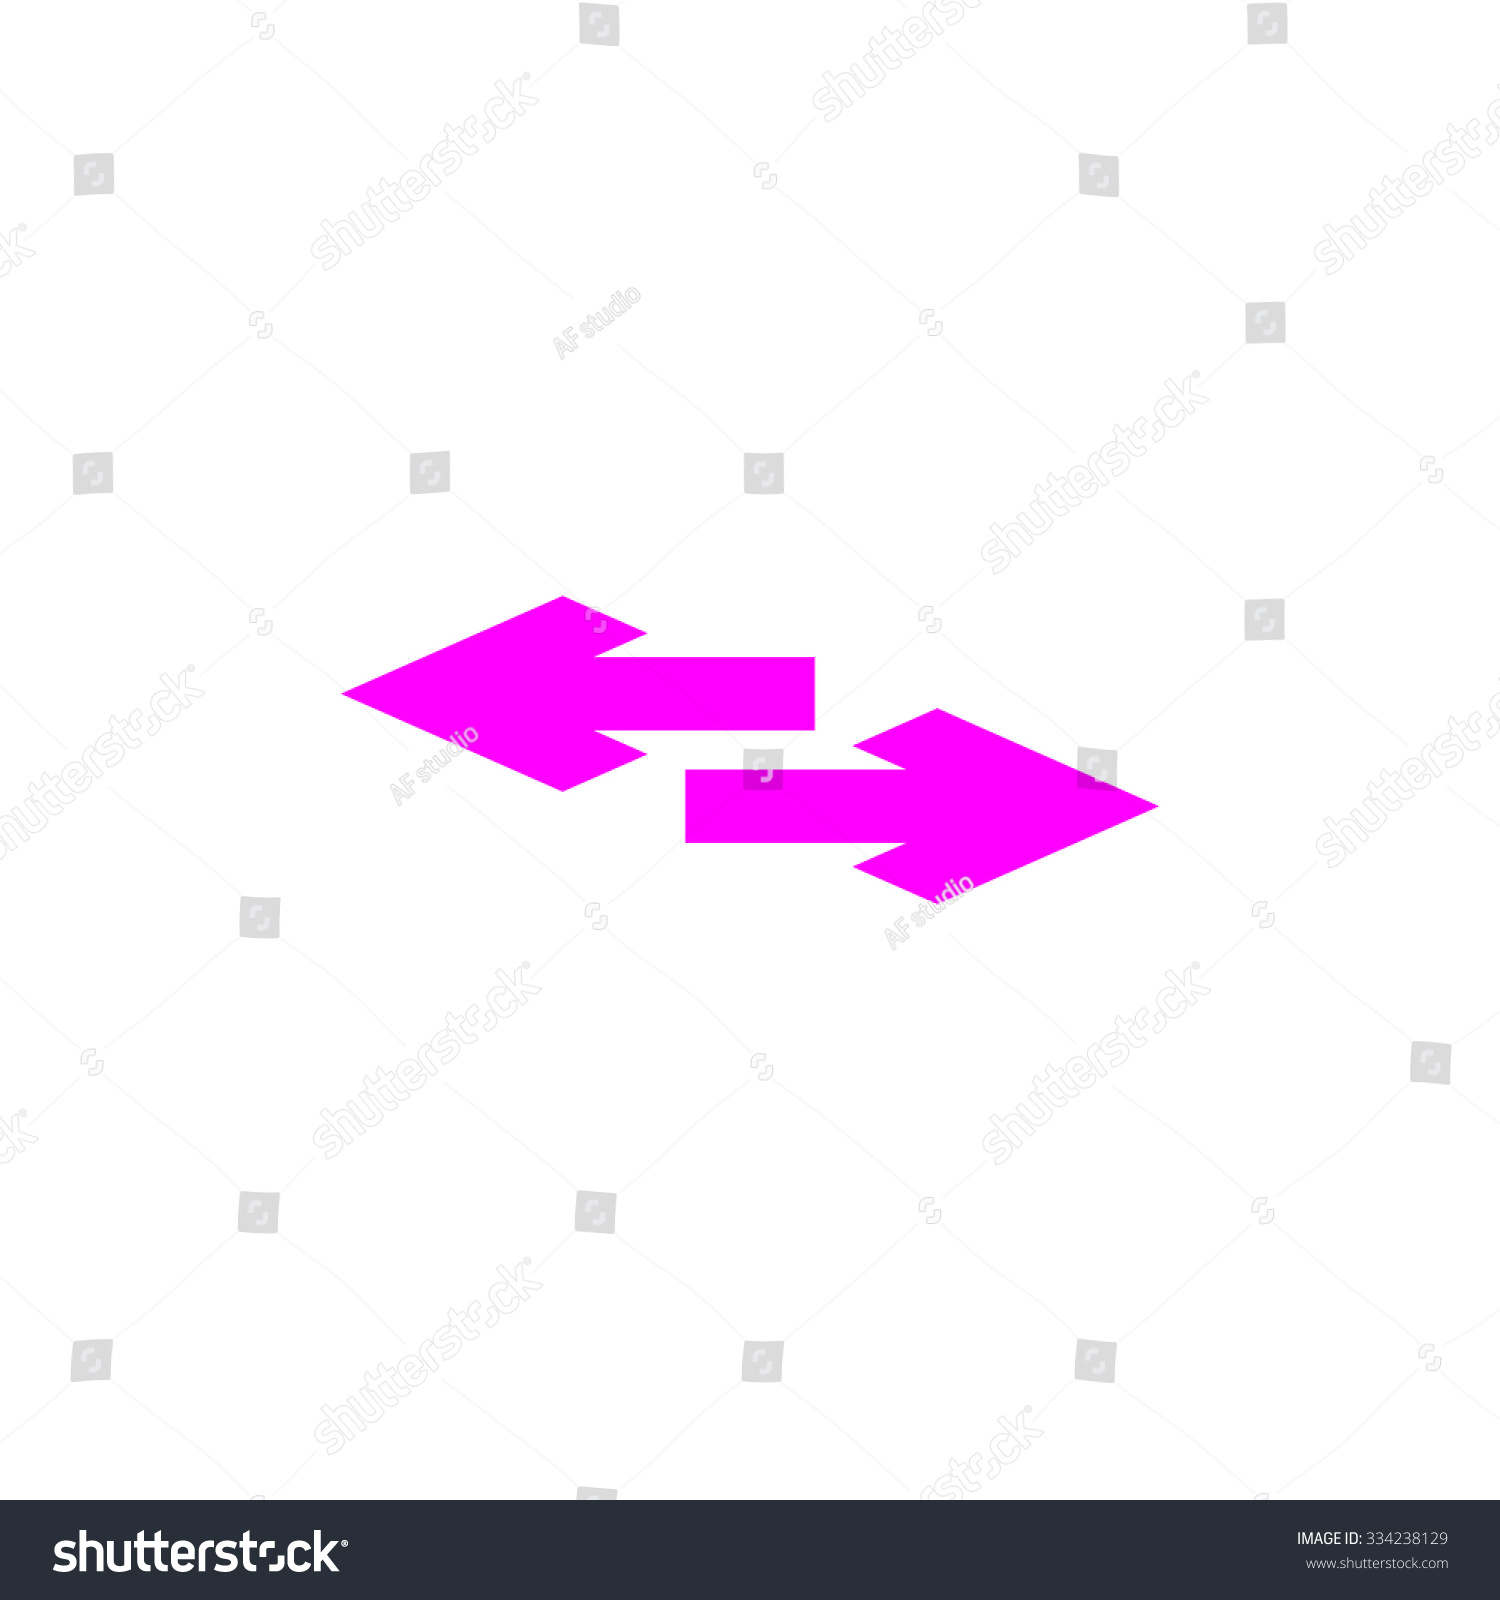 Two Side Arrow Pink Flat Icon Stock Vector 334238129 - Shutterstock